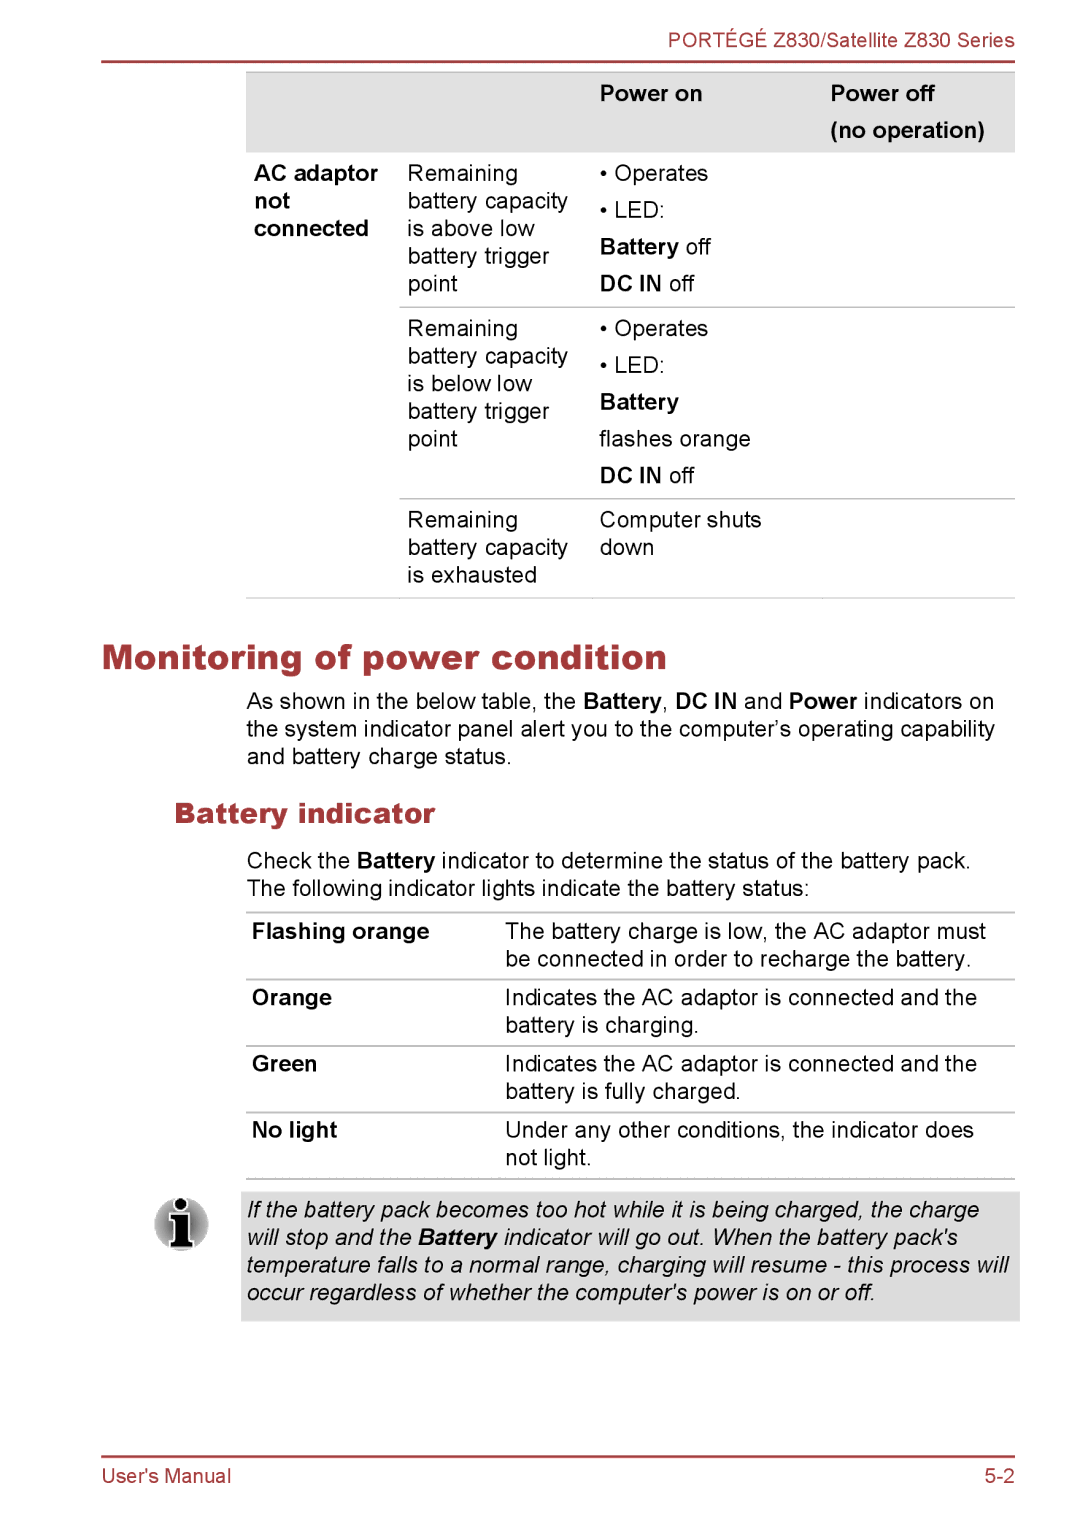 Toshiba Z830 user manual Monitoring of power condition, Battery indicator 